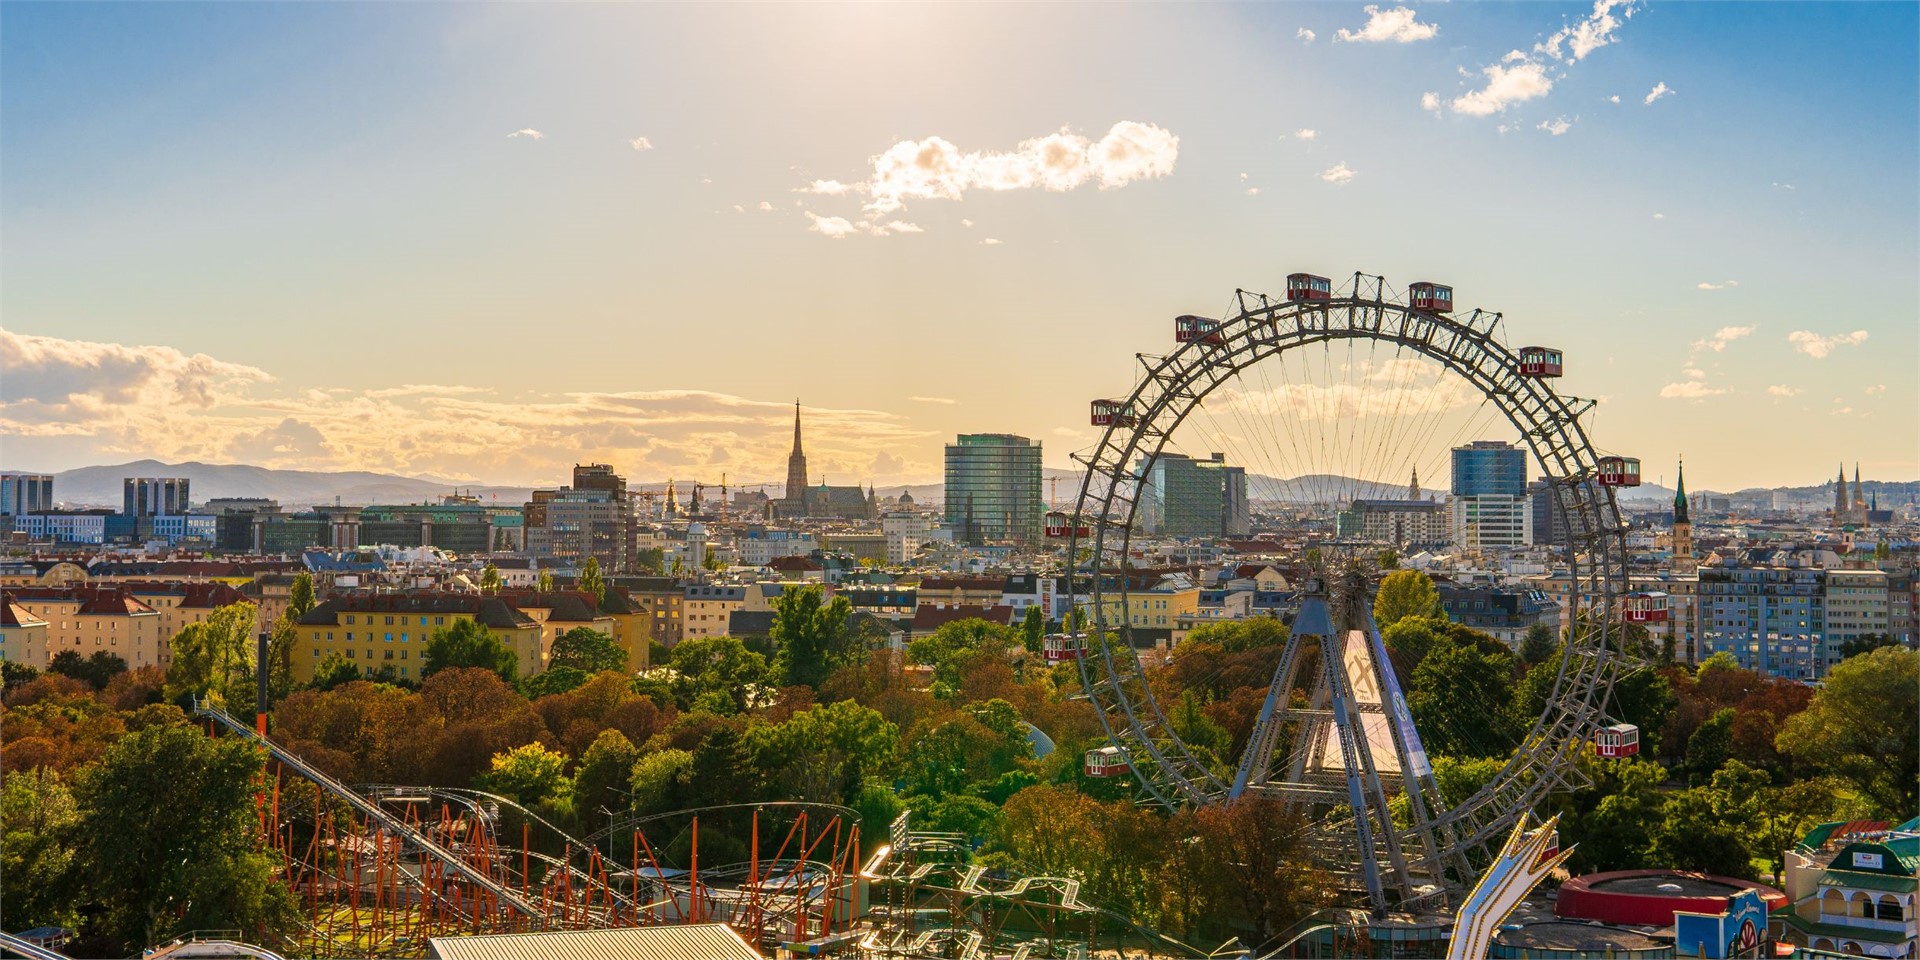 Book your trip to Prater in Vienna